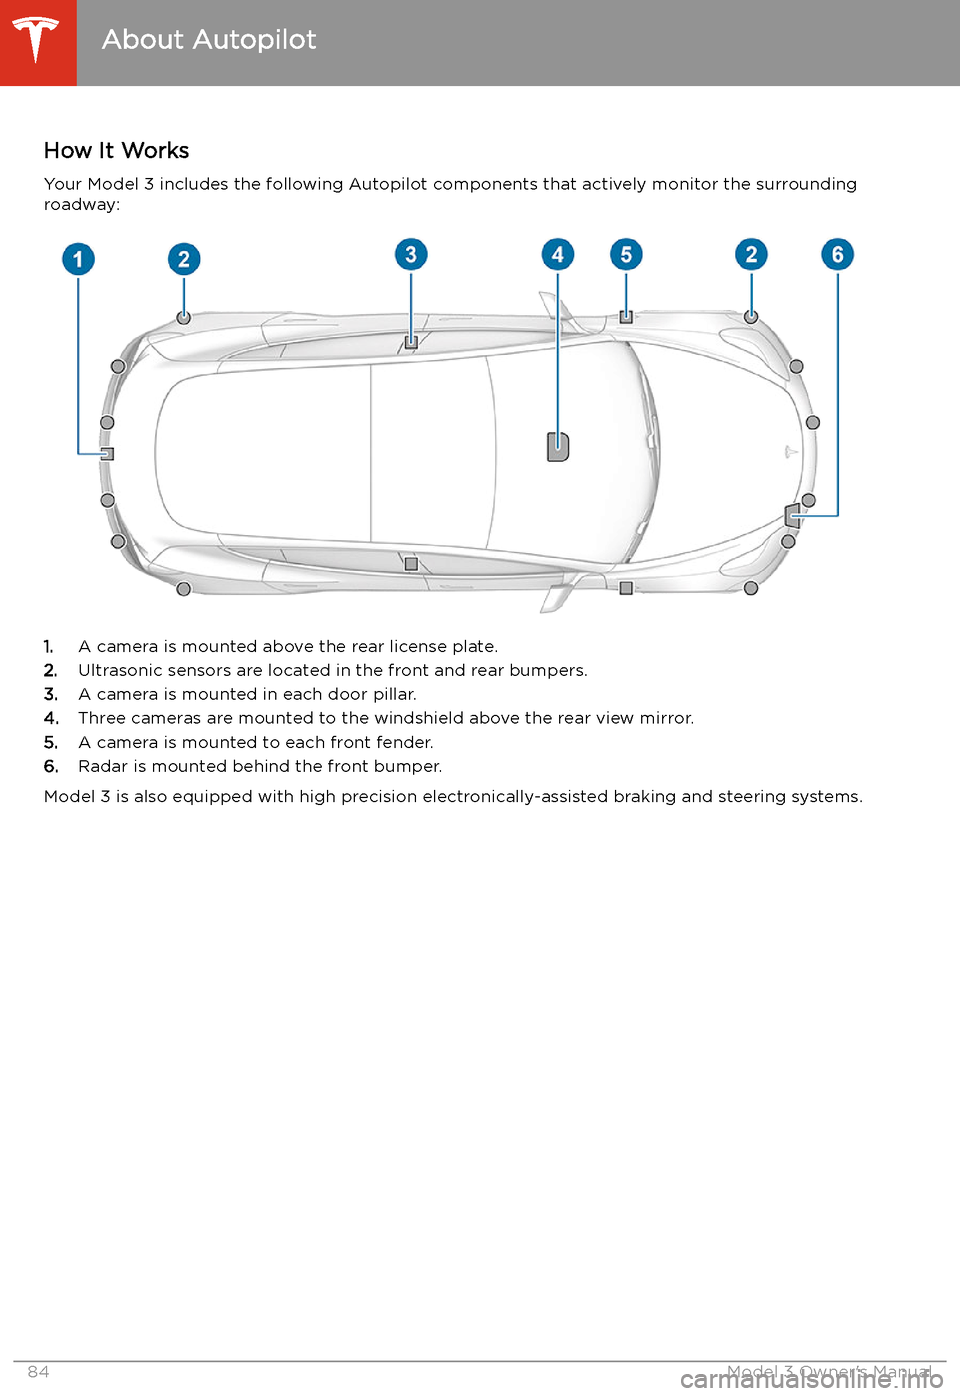 TESLA MODEL 3 2020  Owners Manuals Autopilot
About Autopilot
How It Works Your Model 3 includes the following Autopilot components that actively monitor the surrounding
roadway:
1. A camera is mounted above the rear license plate.
2. U